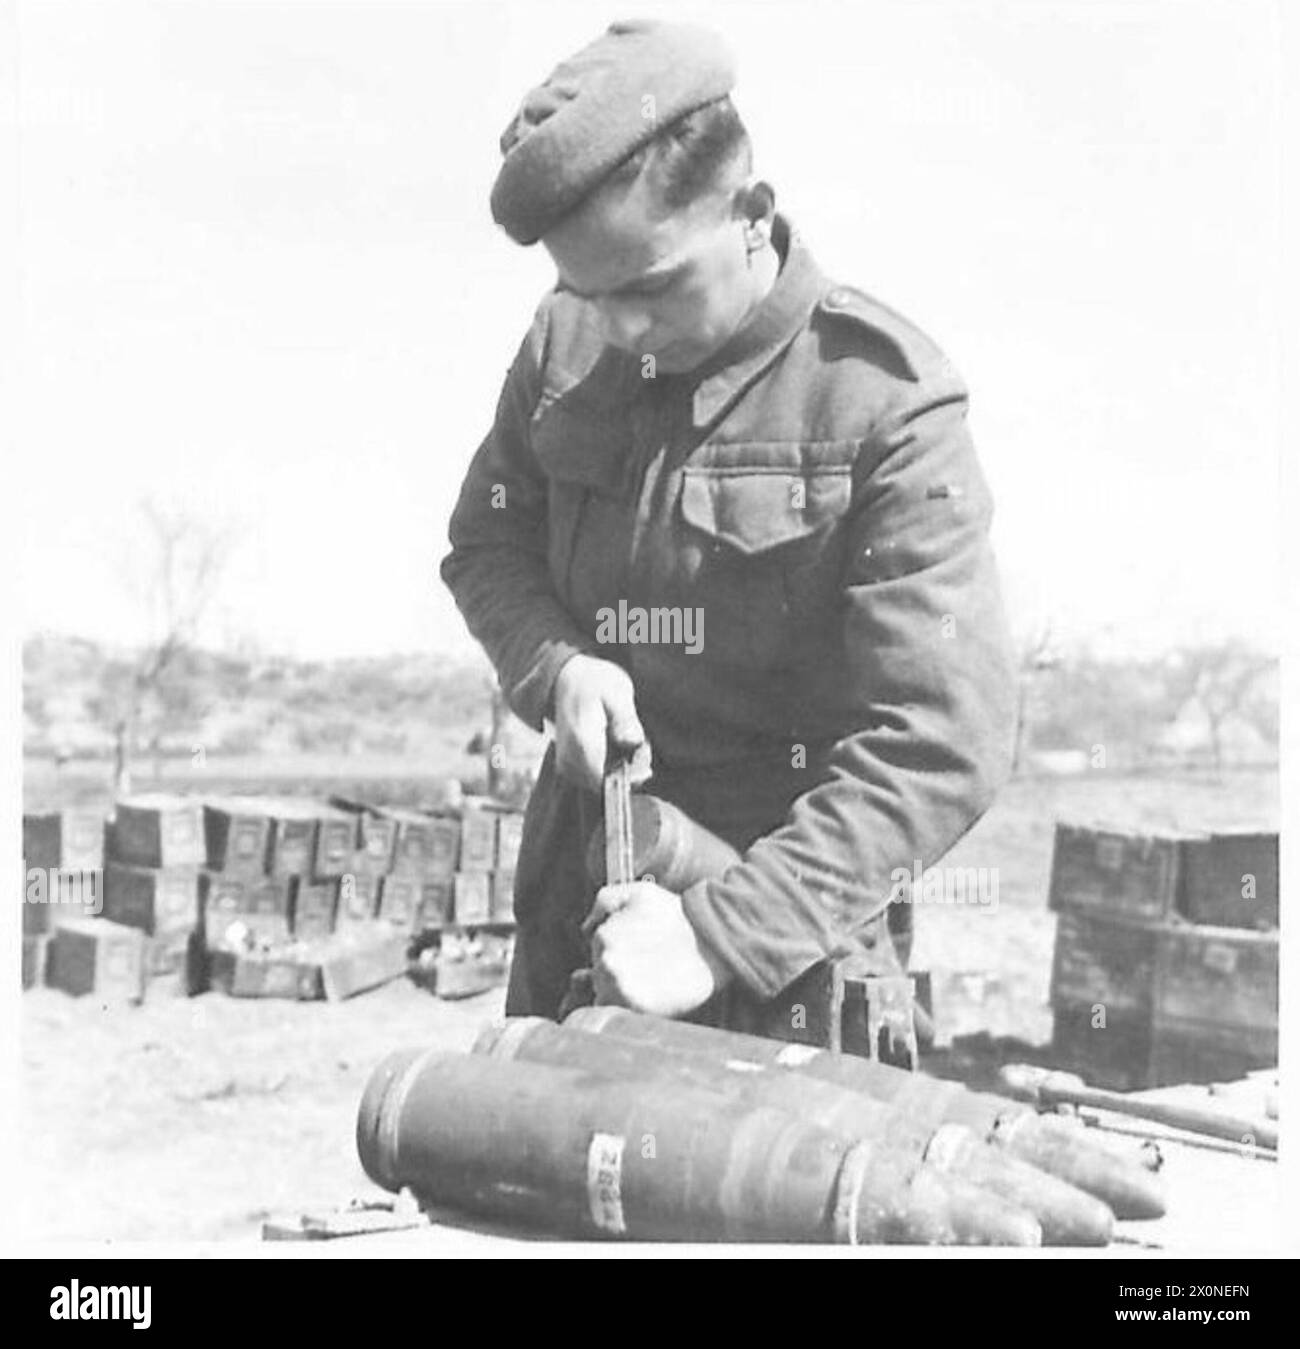 EIGHTH ARMY : PSYCHOLOGICAL WARFARE - Pte. Carnell of Darlington unscrewing the base plate of a 25-pounder smoke shell Photographic negative , British Army Stock Photo